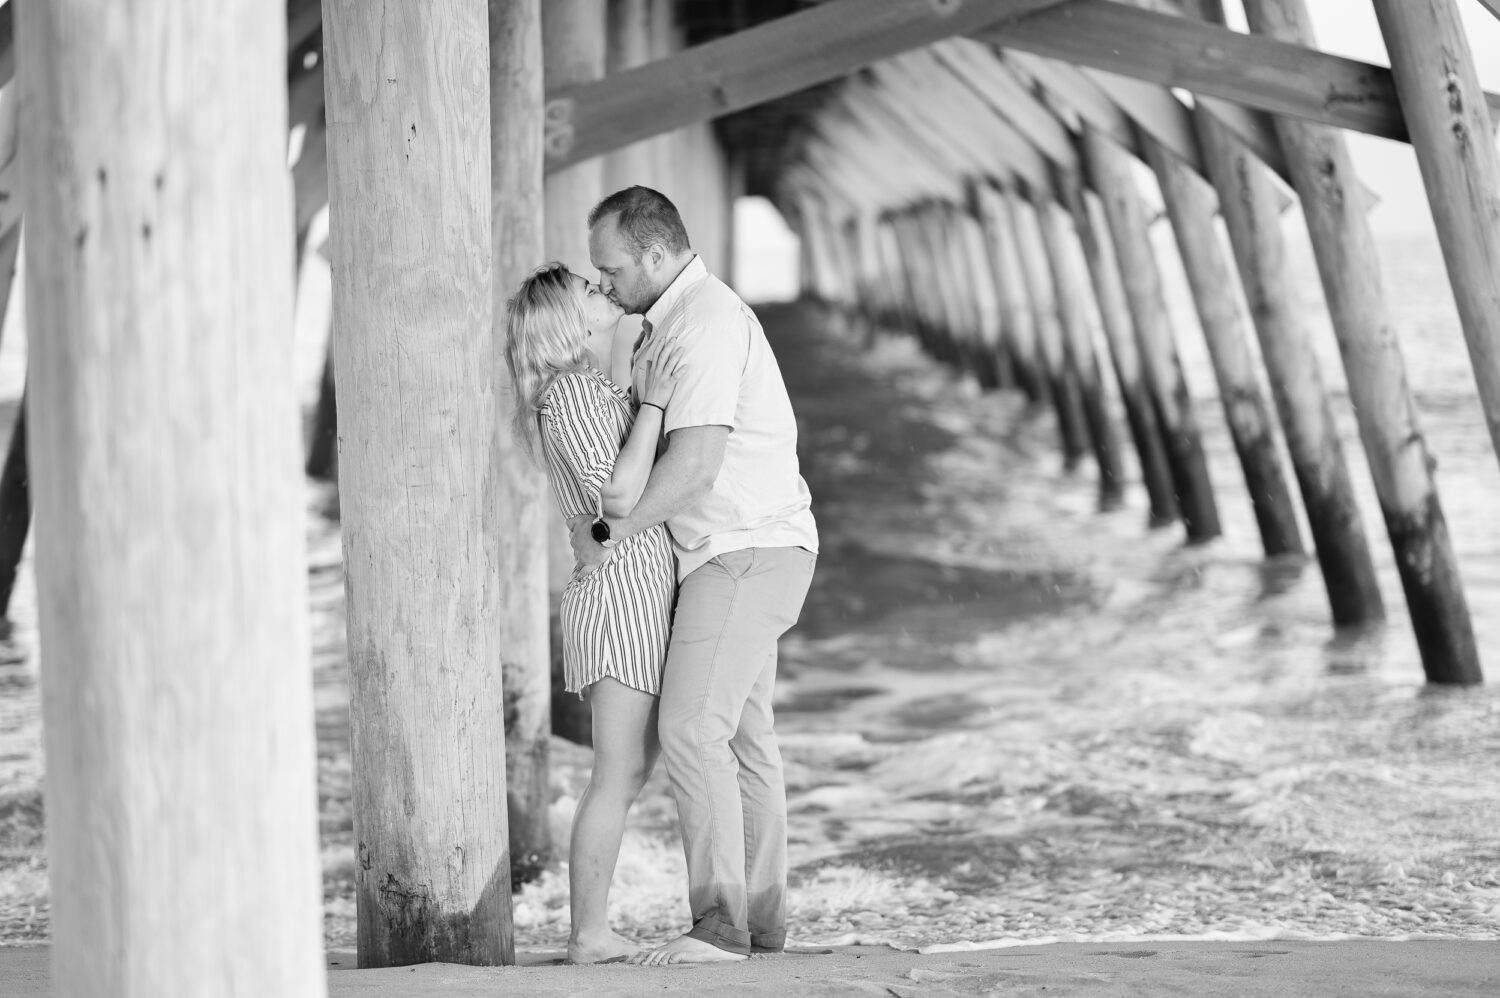 Kiss under the pier in black and white - Myrtle Beach State Park